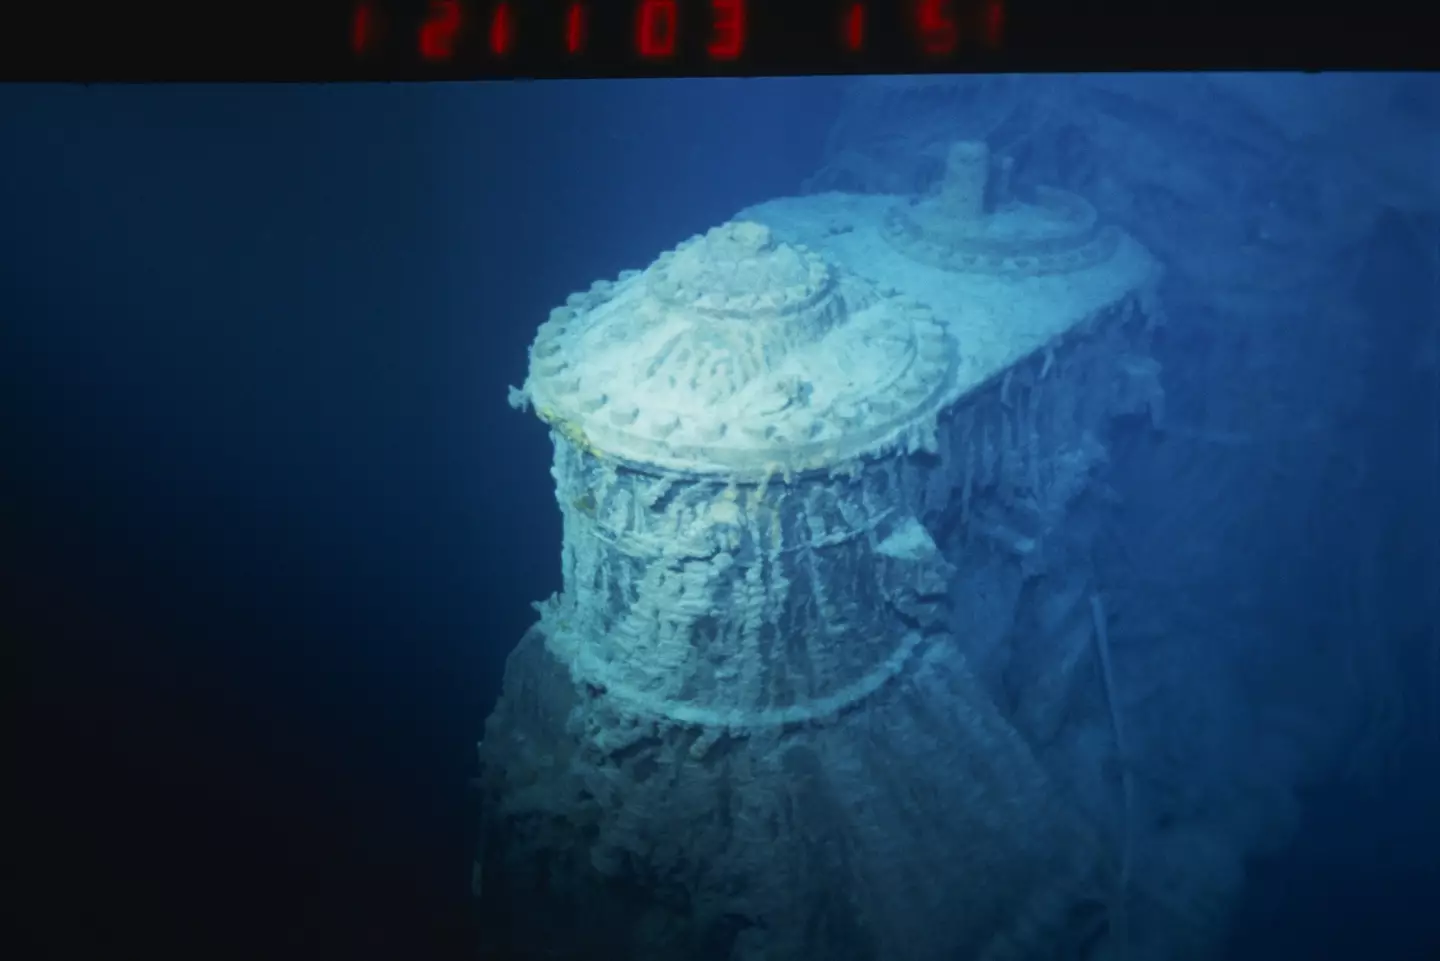 Some experts have questioned if the sound was caused by the Titanic wreckage.